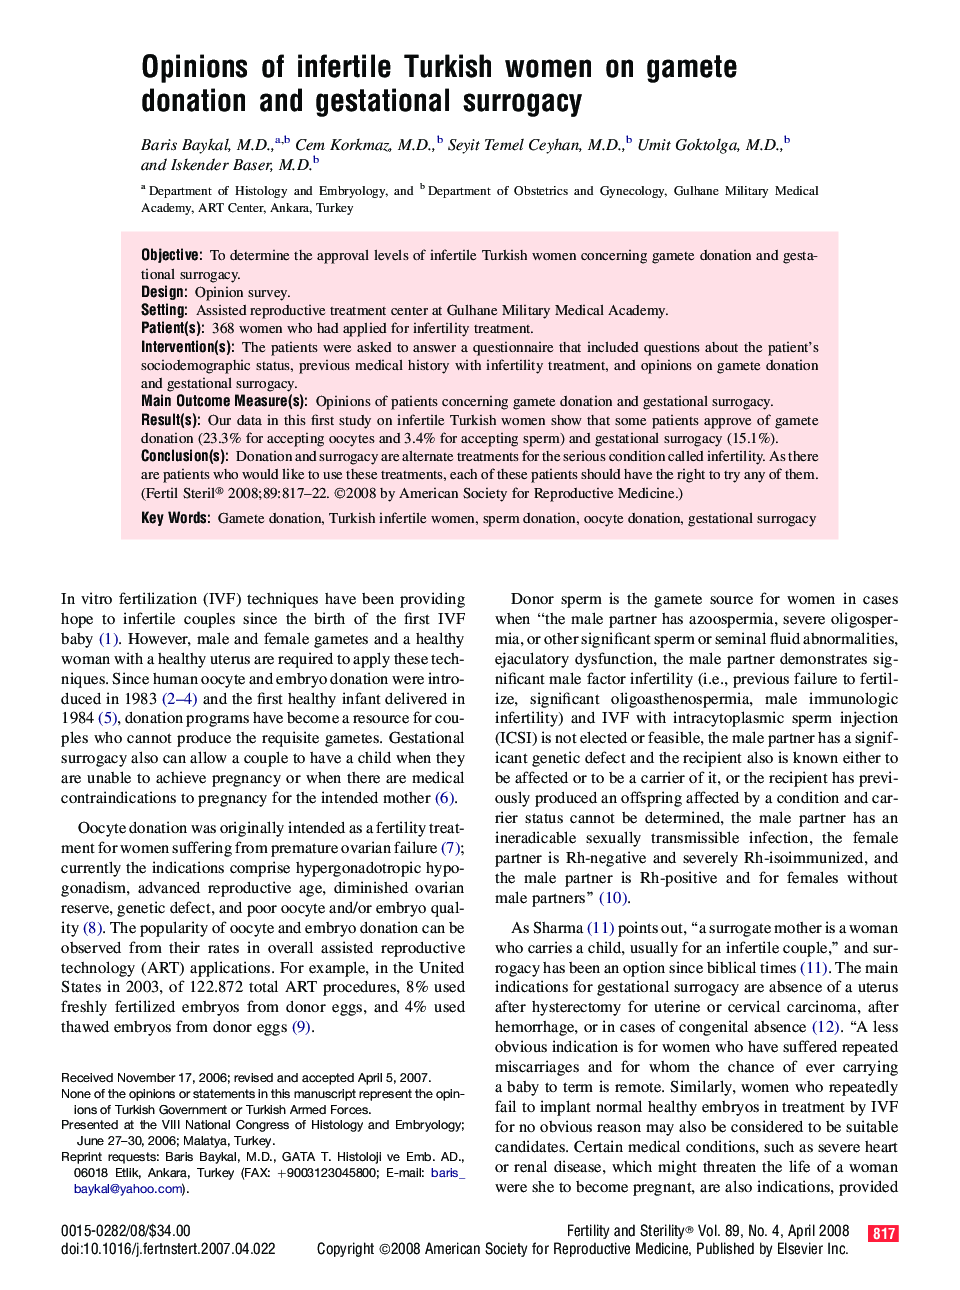 Opinions of infertile Turkish women on gamete donation and gestational surrogacy 